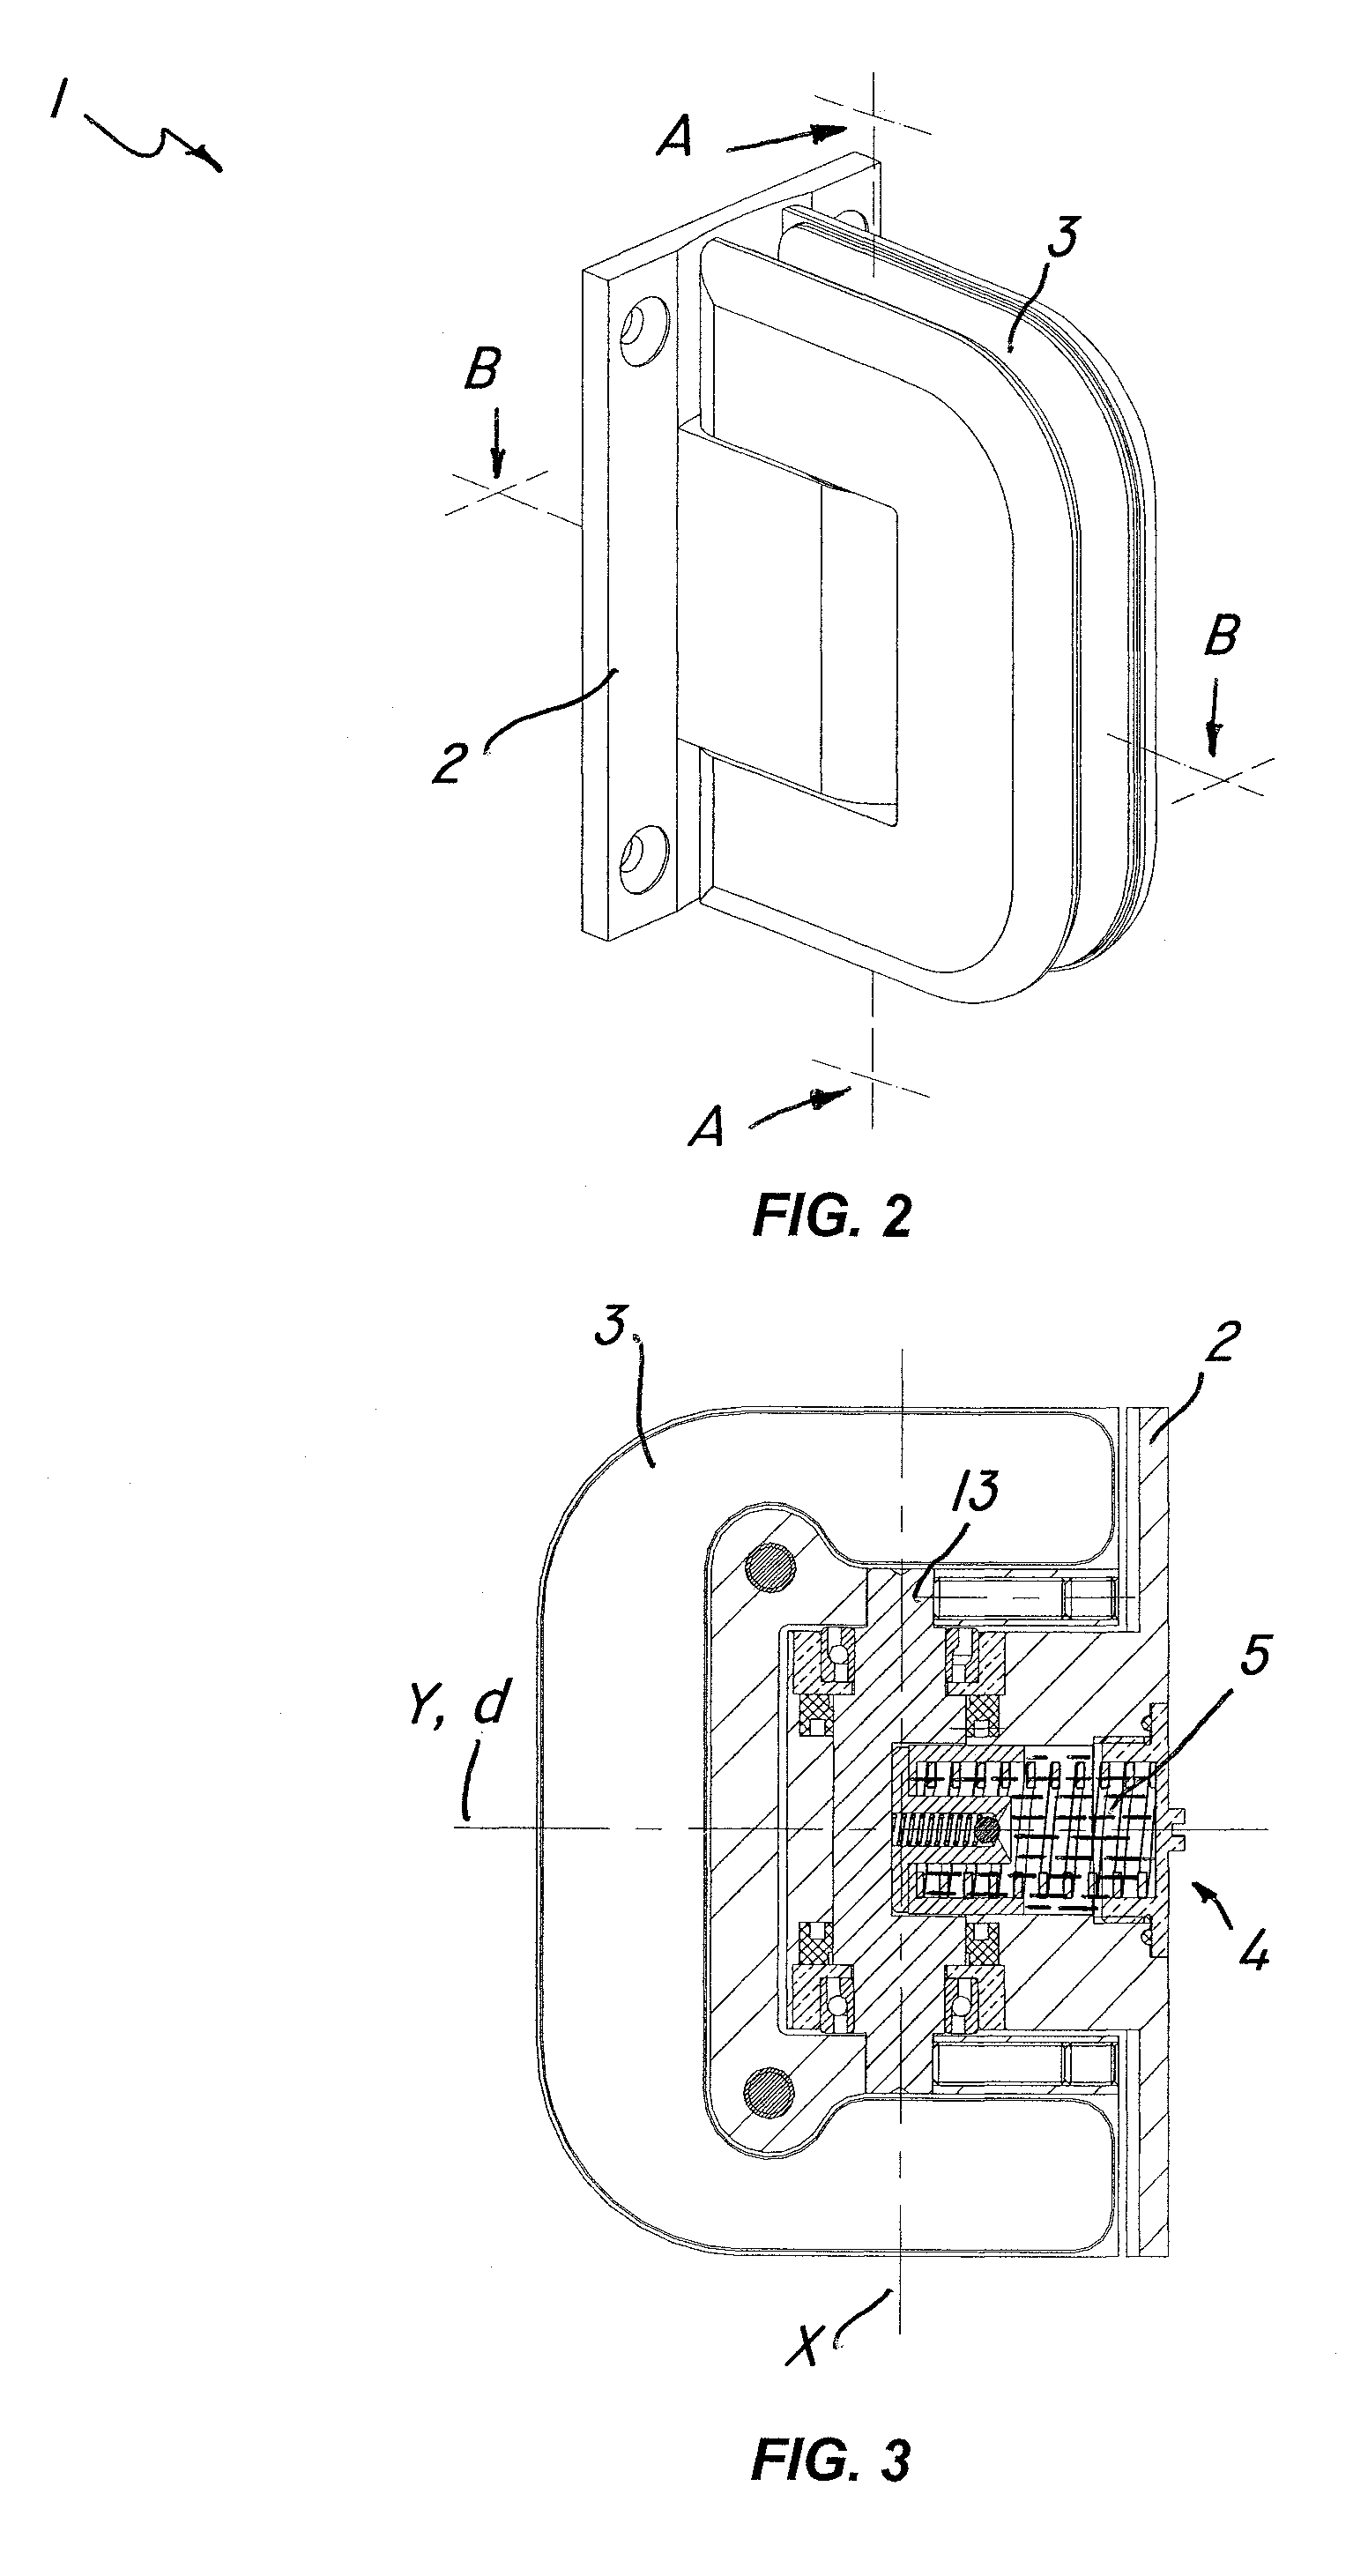 Hinge structure for self-closing doors